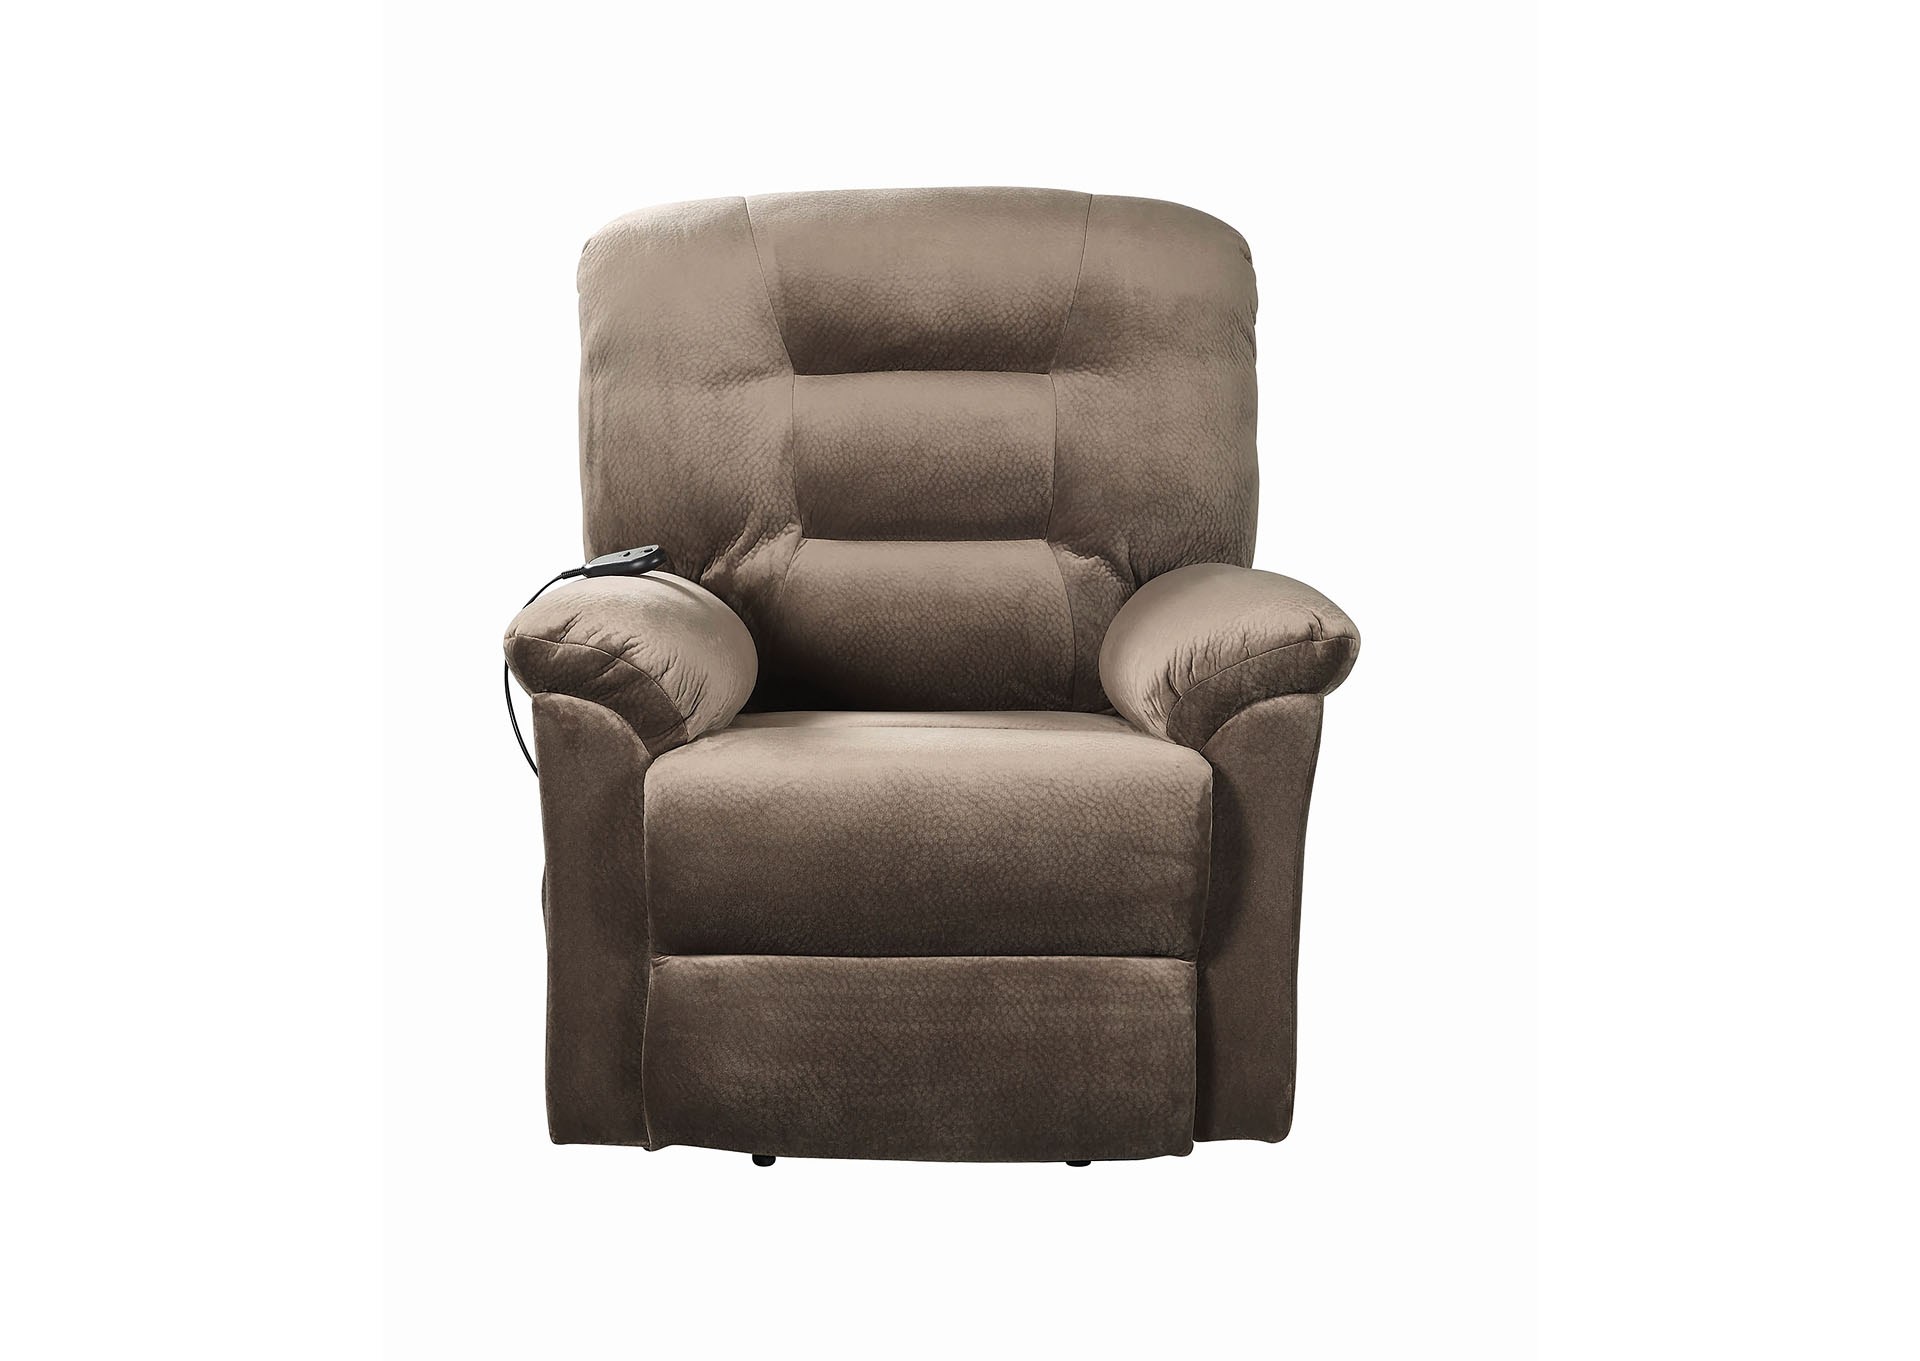 Taupe Casual Brown Sugar Power Lift Recliner,Coaster Furniture